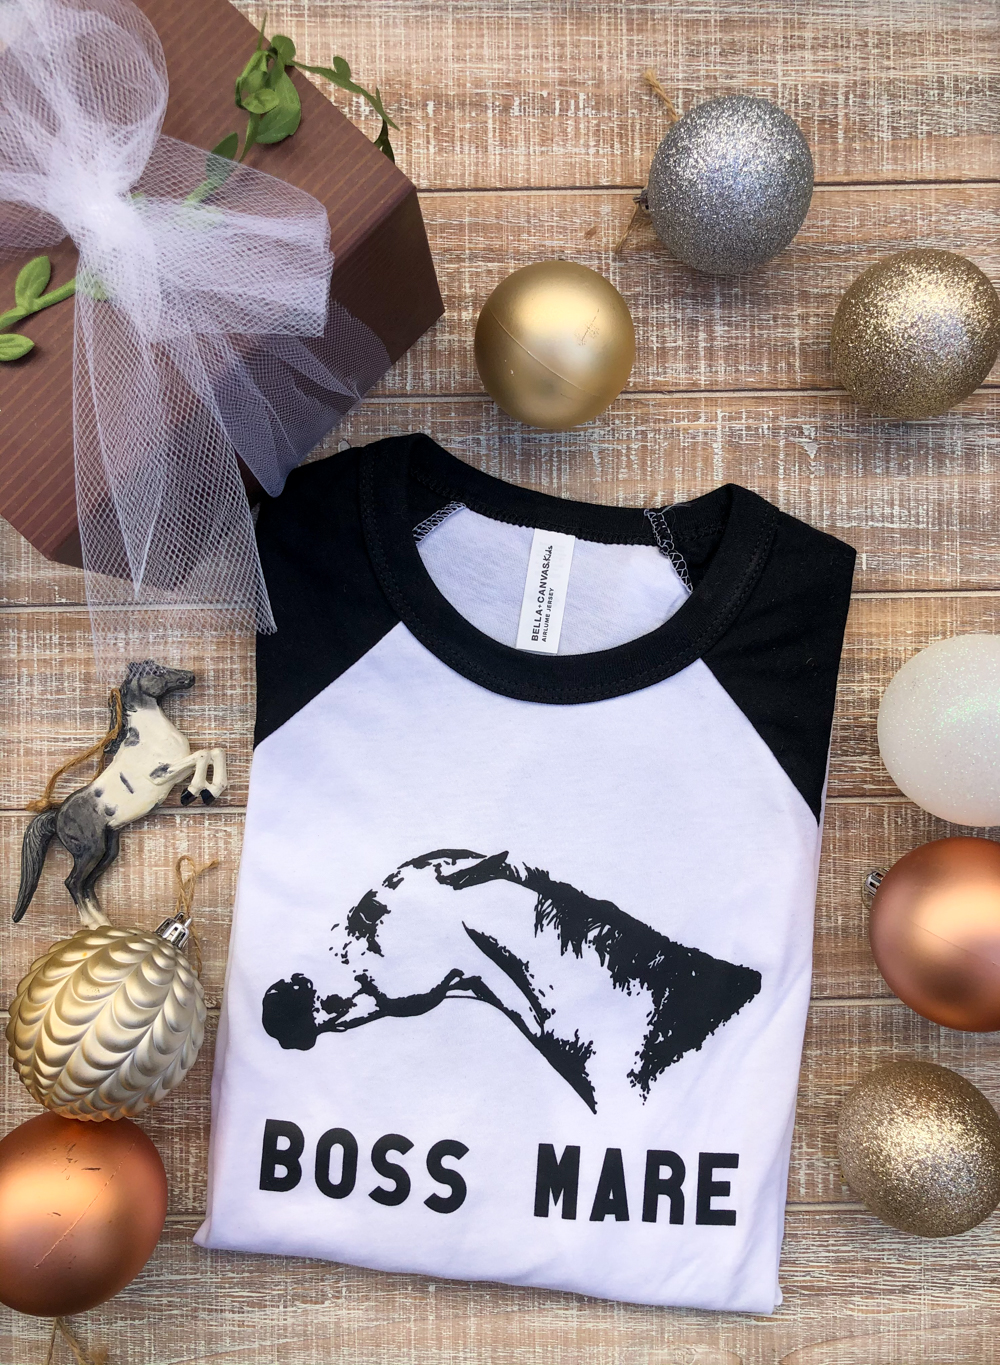 Boss Mare baseball tee by Equestrian Creations